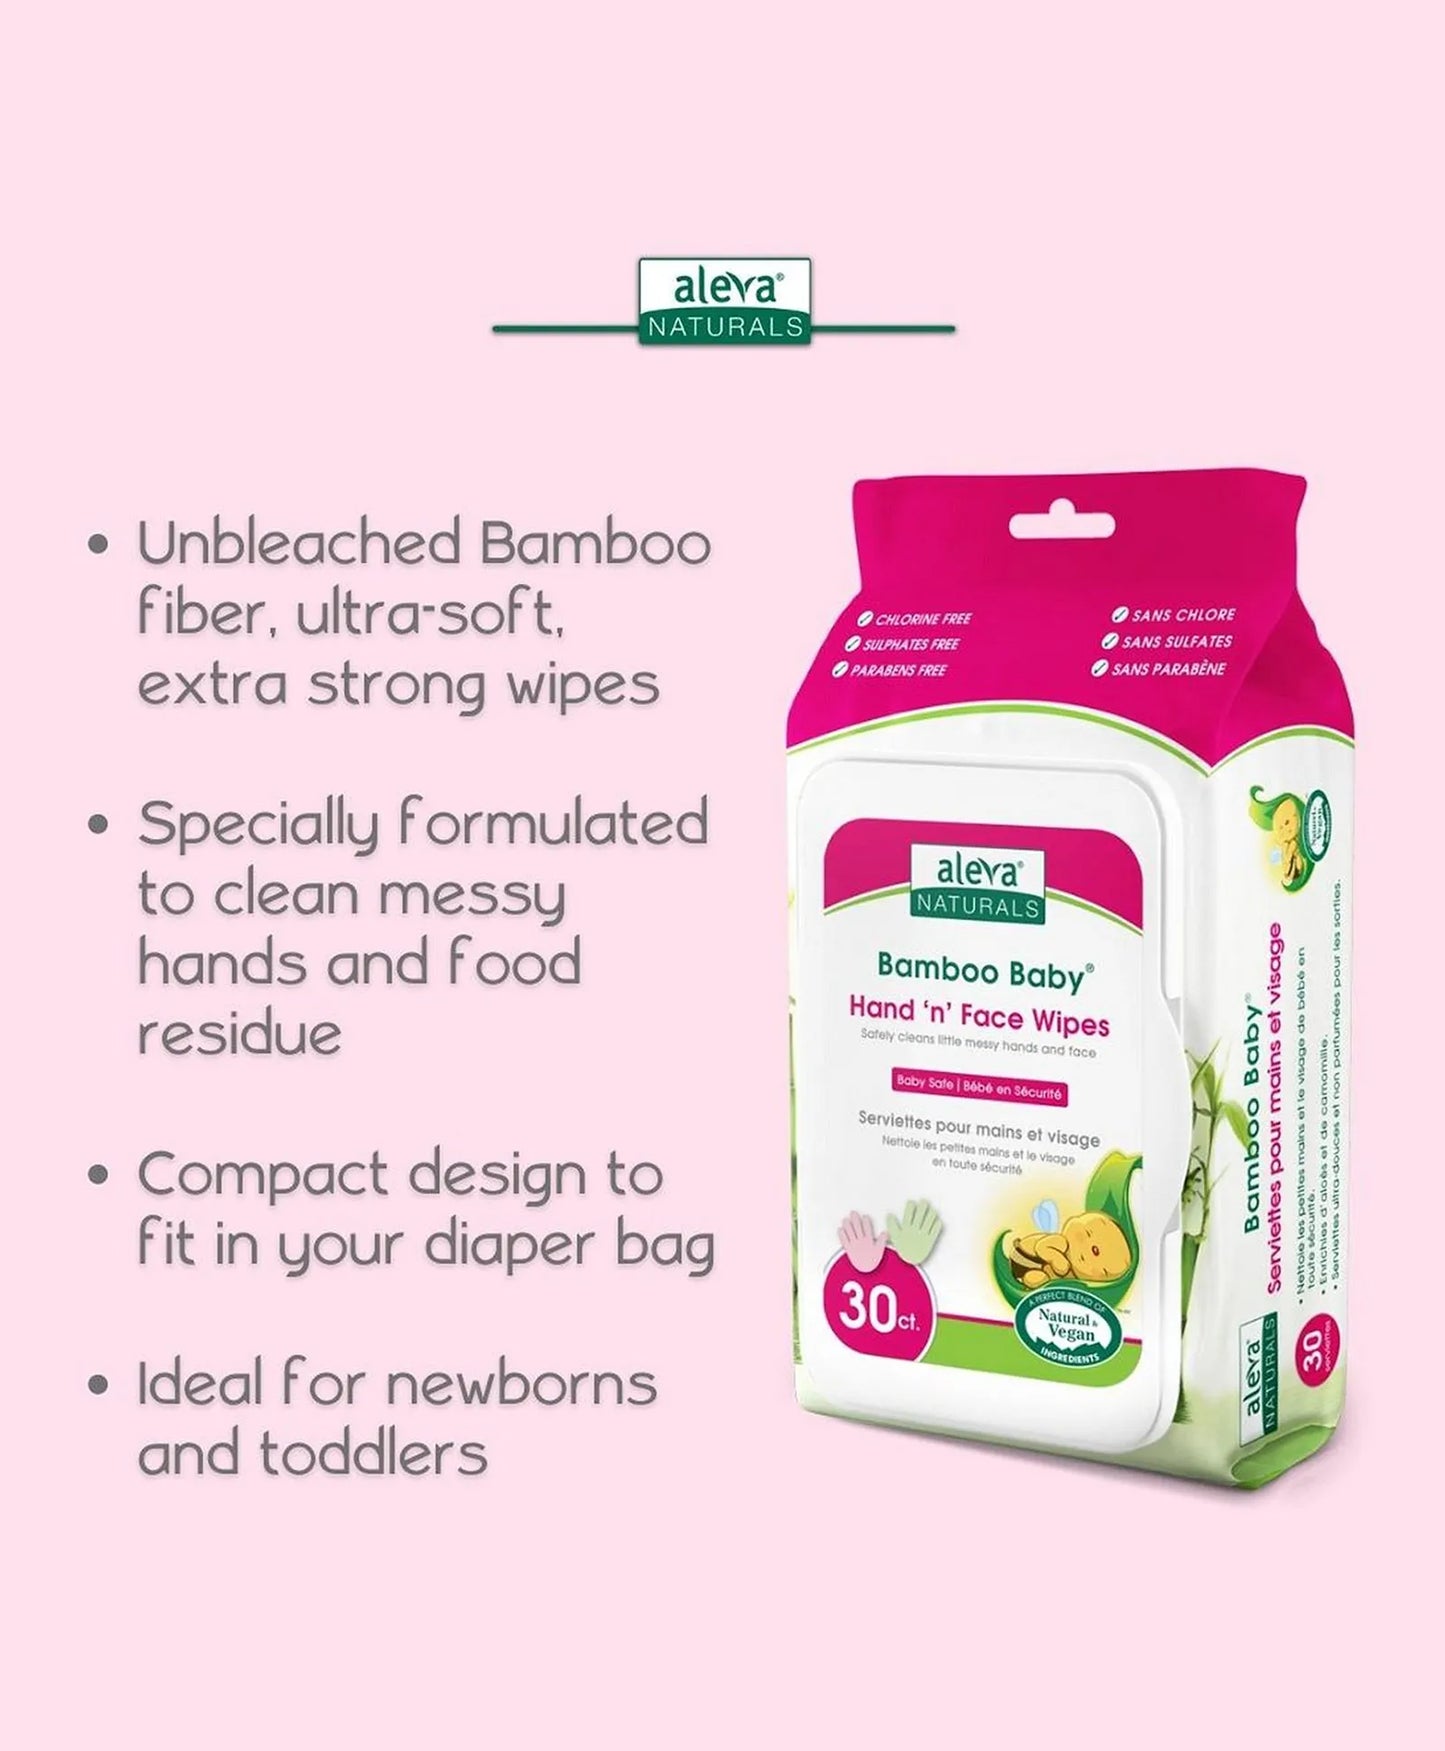 Aleva Naturals Bamboo Baby Specialty Hand 'N' Face Wipes - 30ct